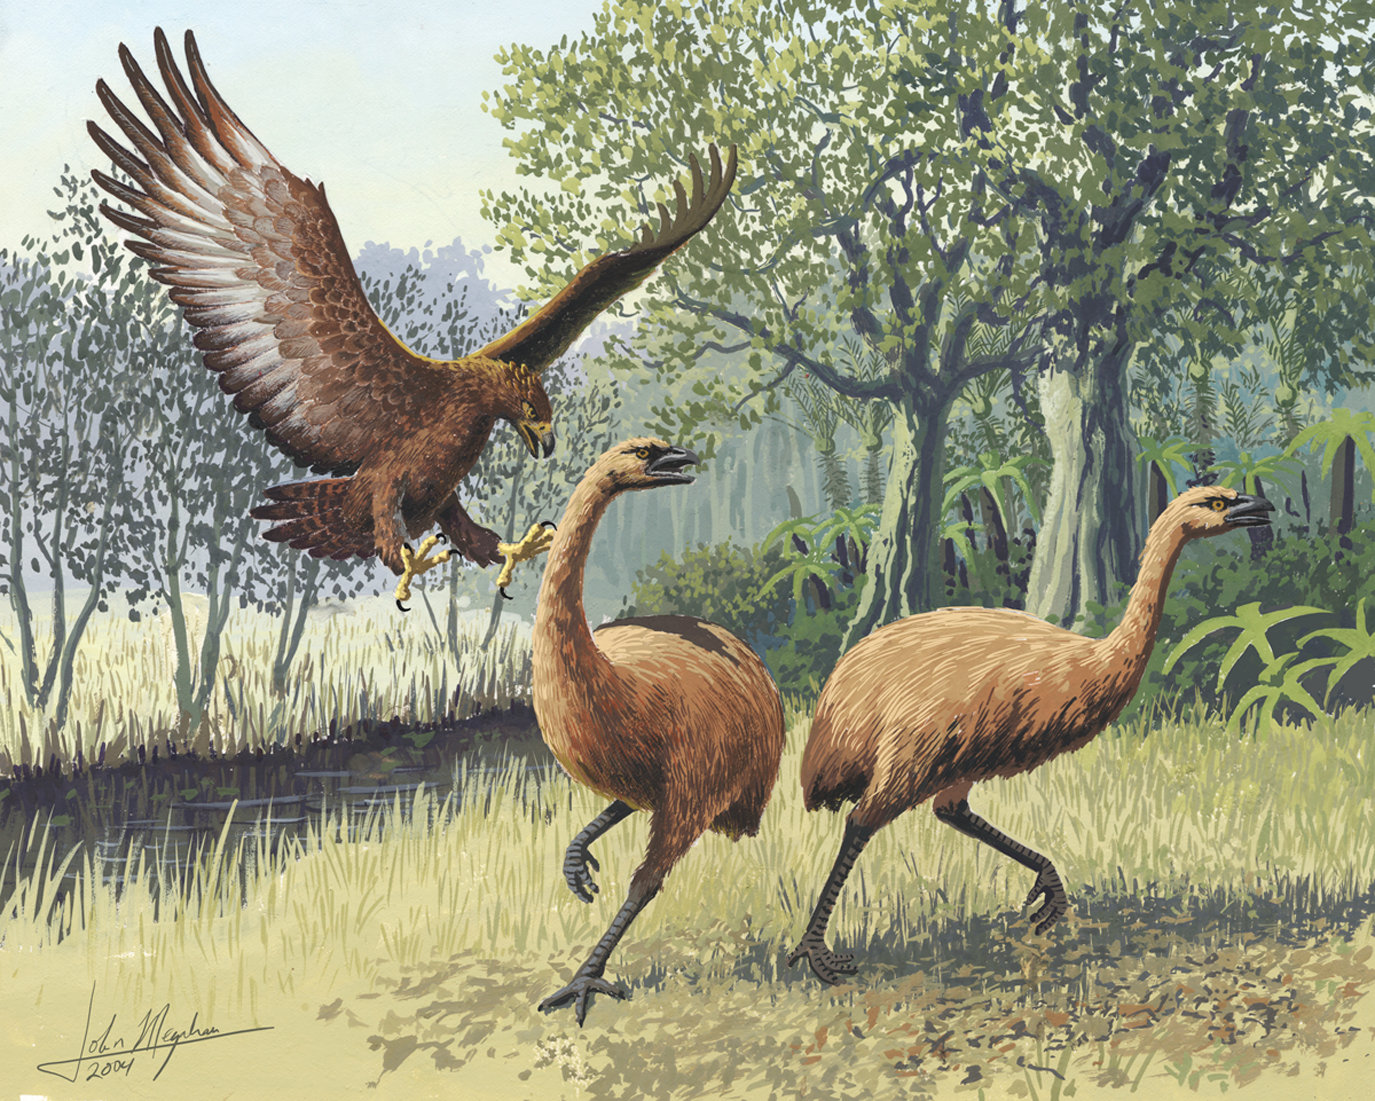 #DNA provides unique look at moa and climate change